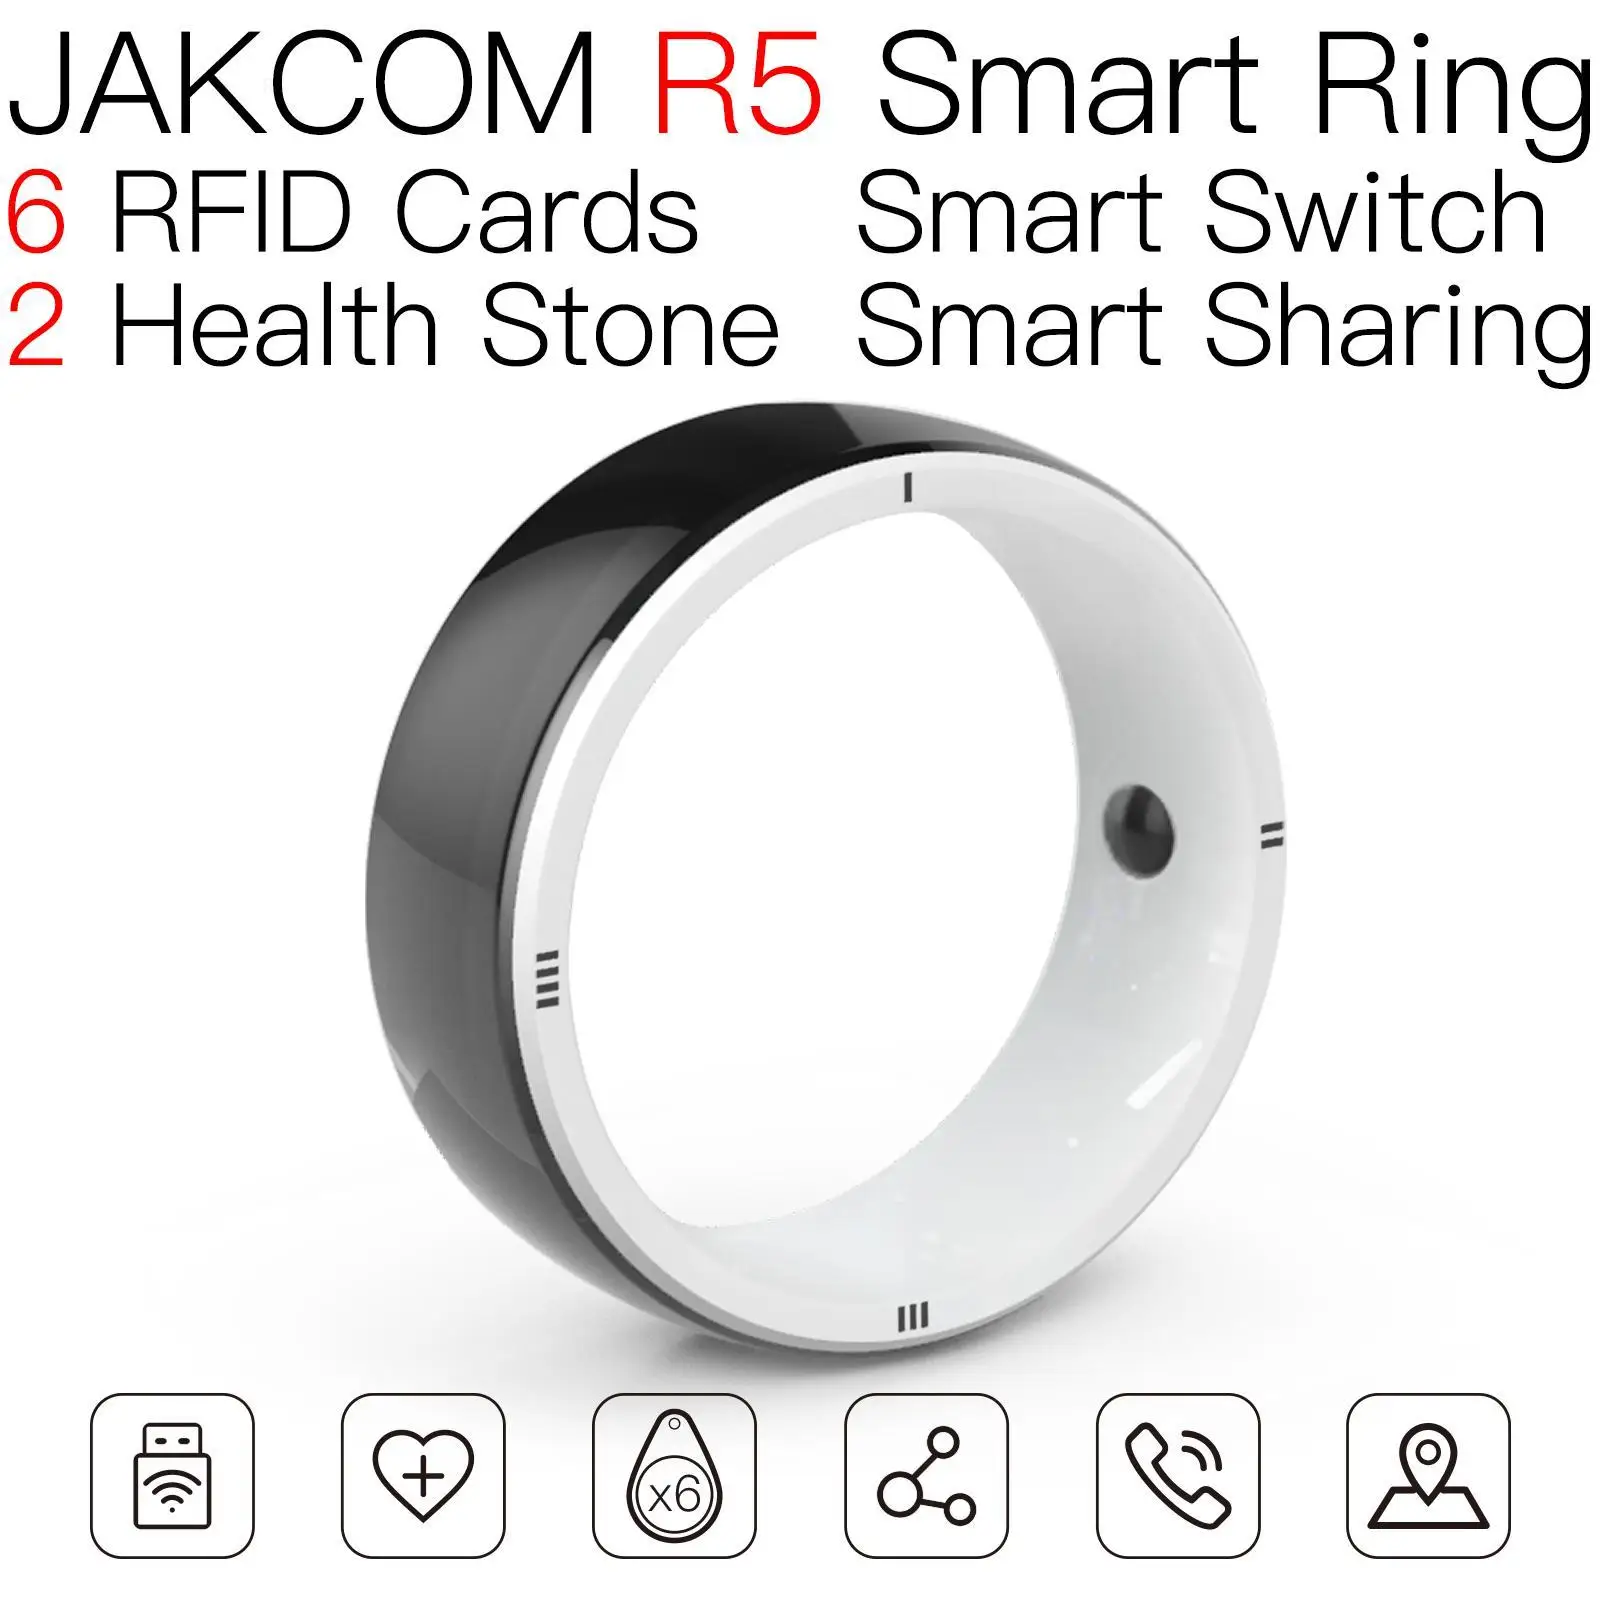 

JAKCOM R5 Smart Ring Super value than 2 rupees items free shipping rfid iso 14443 em4305 125khz rewritable nfc uid changeable